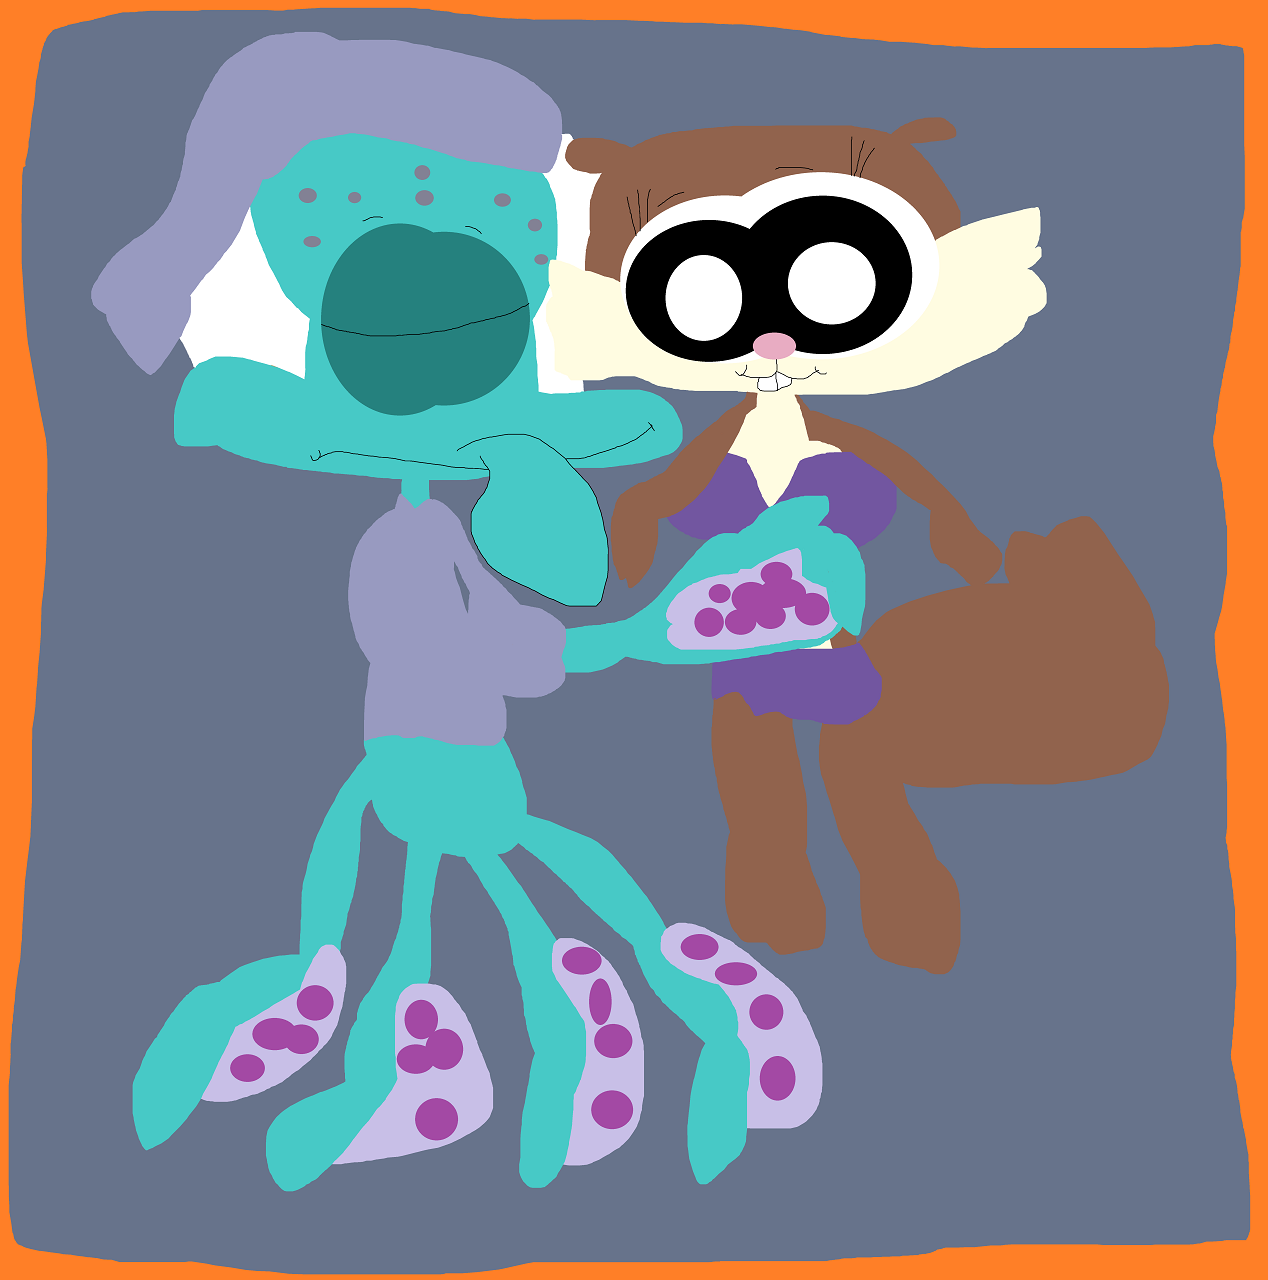 Squidward Snuggling With A Giant Sandy Plush by Falconlobo